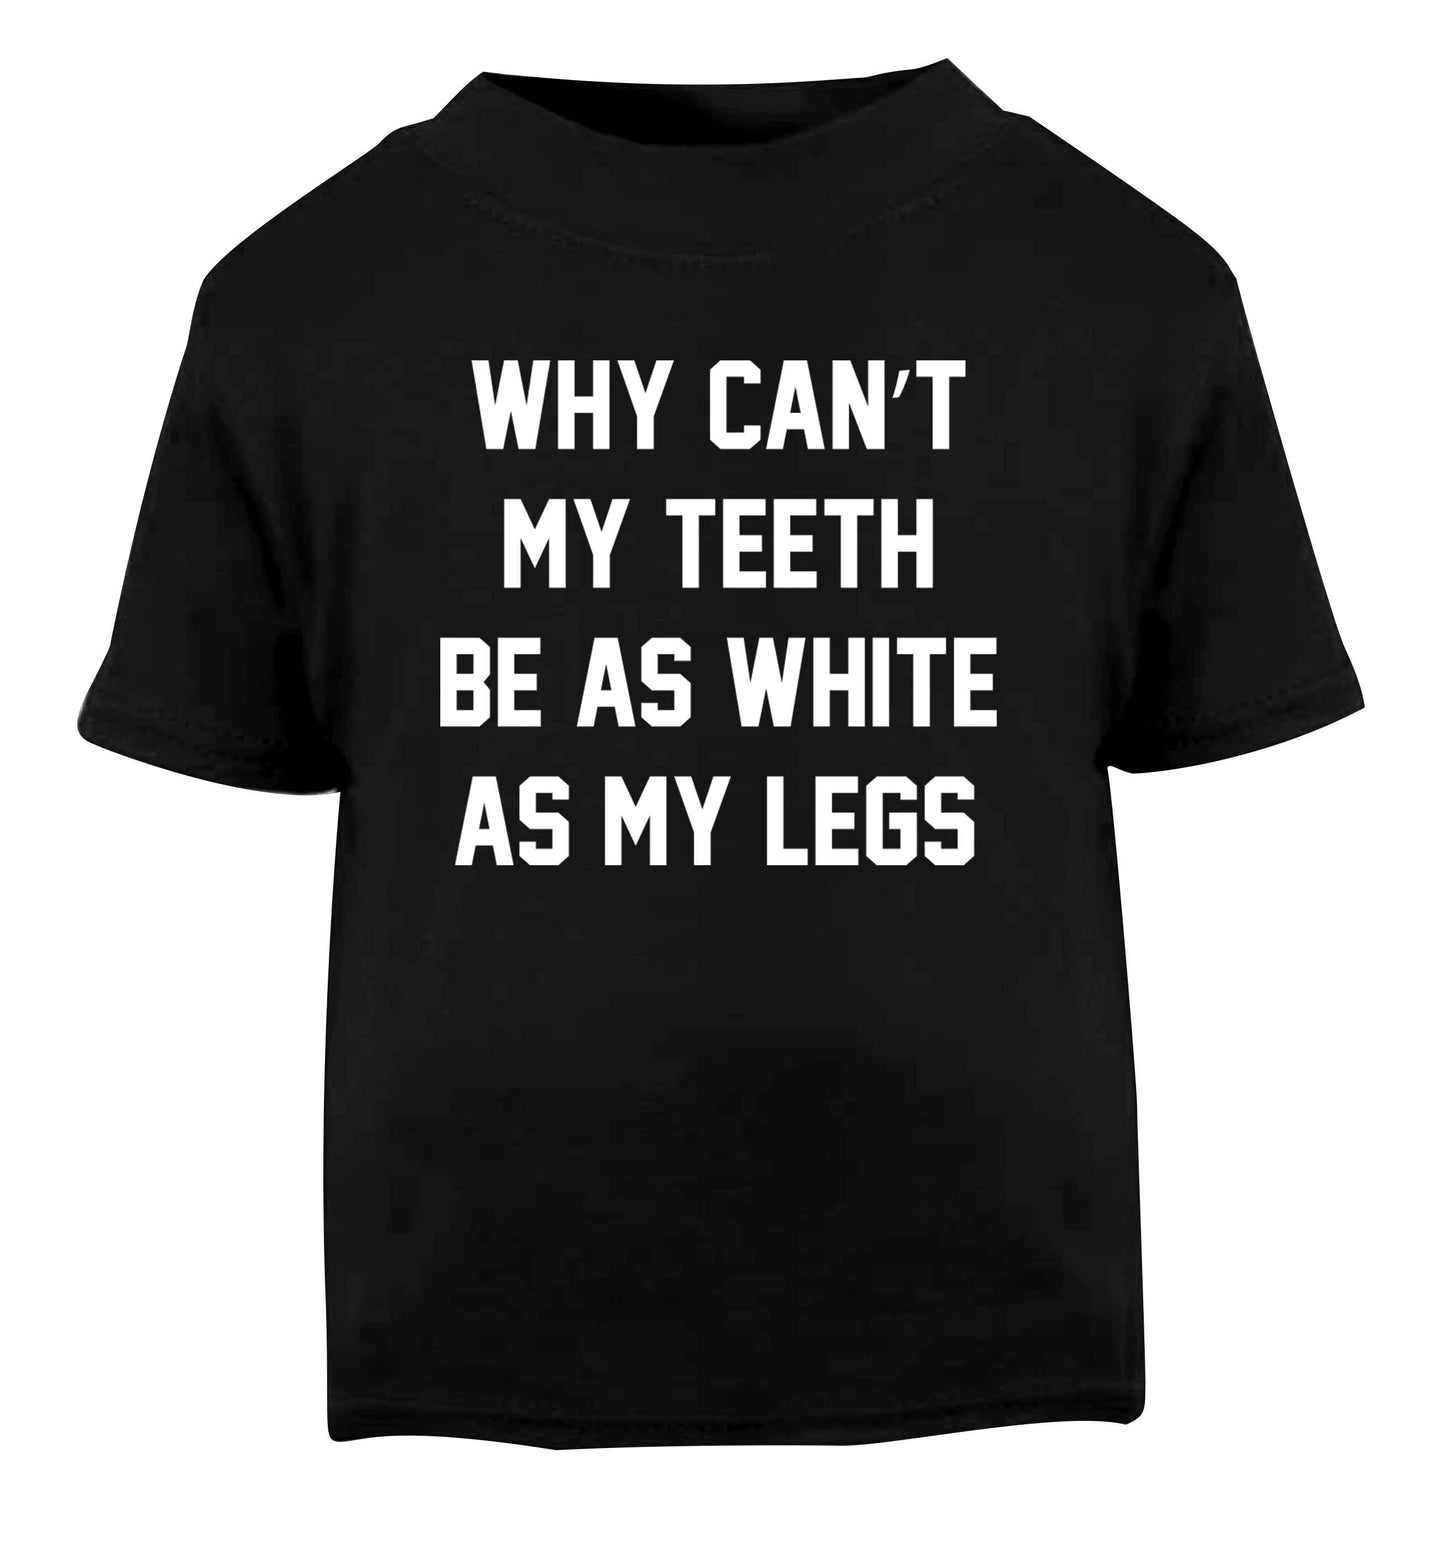 Why can't my teeth be as white as my legs Black Baby Toddler Tshirt 2 years